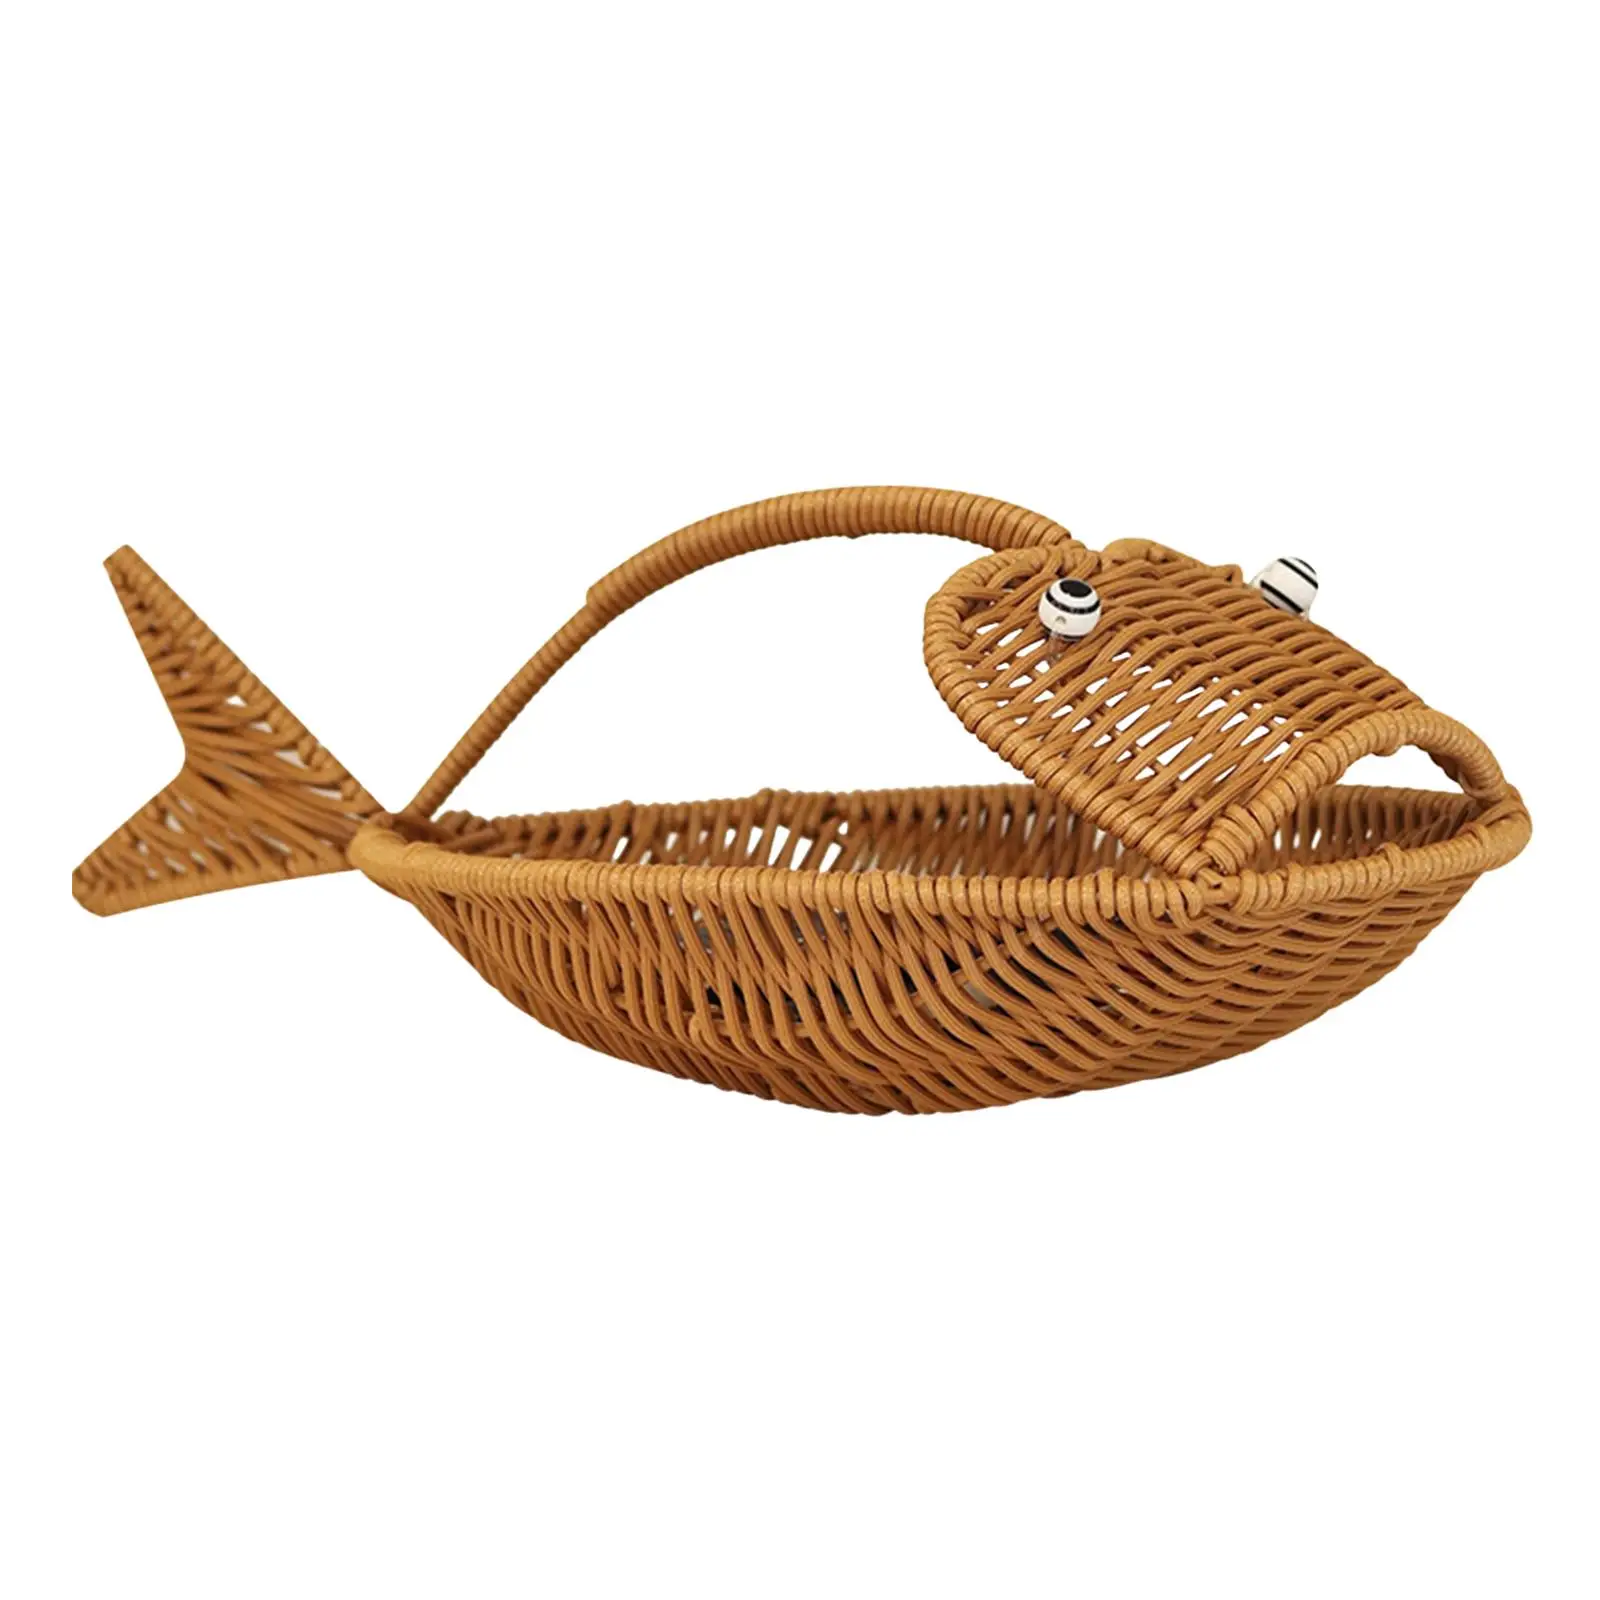 Wicker Vegetable Storage Storage Basket Cute Fish Shape Bread Baking Tray Rattan Bread Baskets for Camping Dining Room Picnic